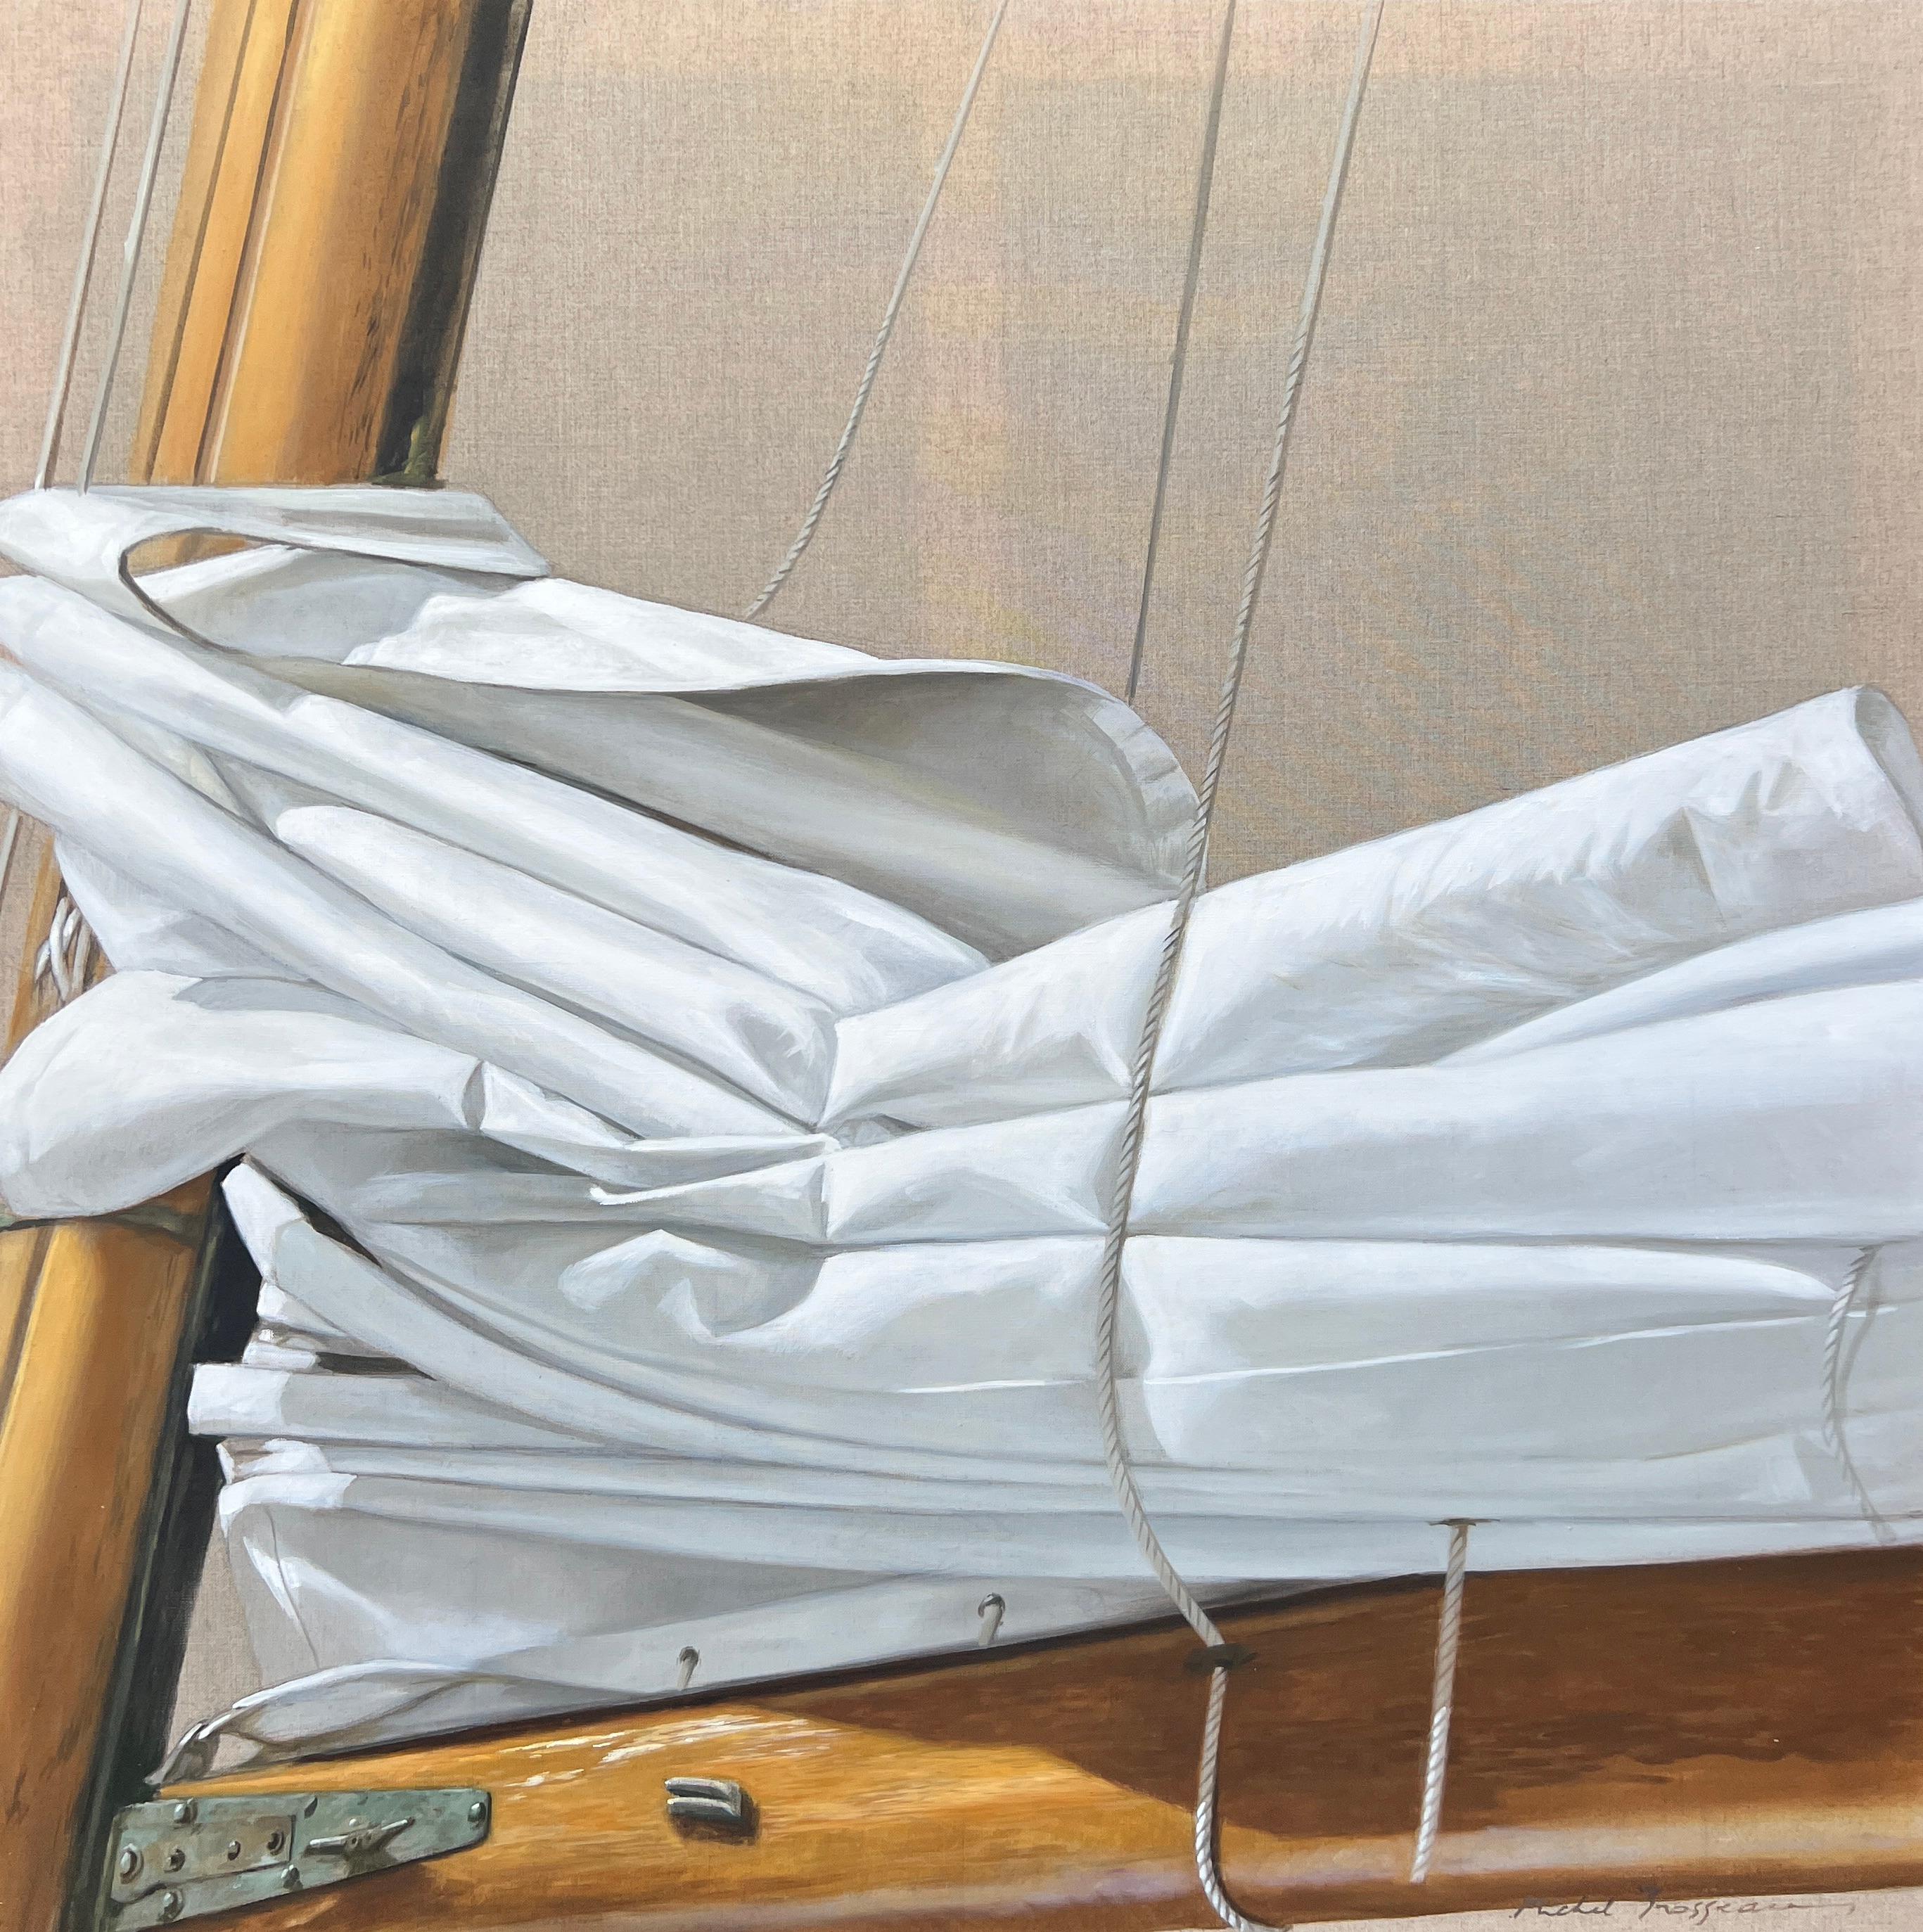 Michel Brosseau Still-Life Painting - "Voile Fraiche" photorealist oil painting of a folded white sail, linen behind